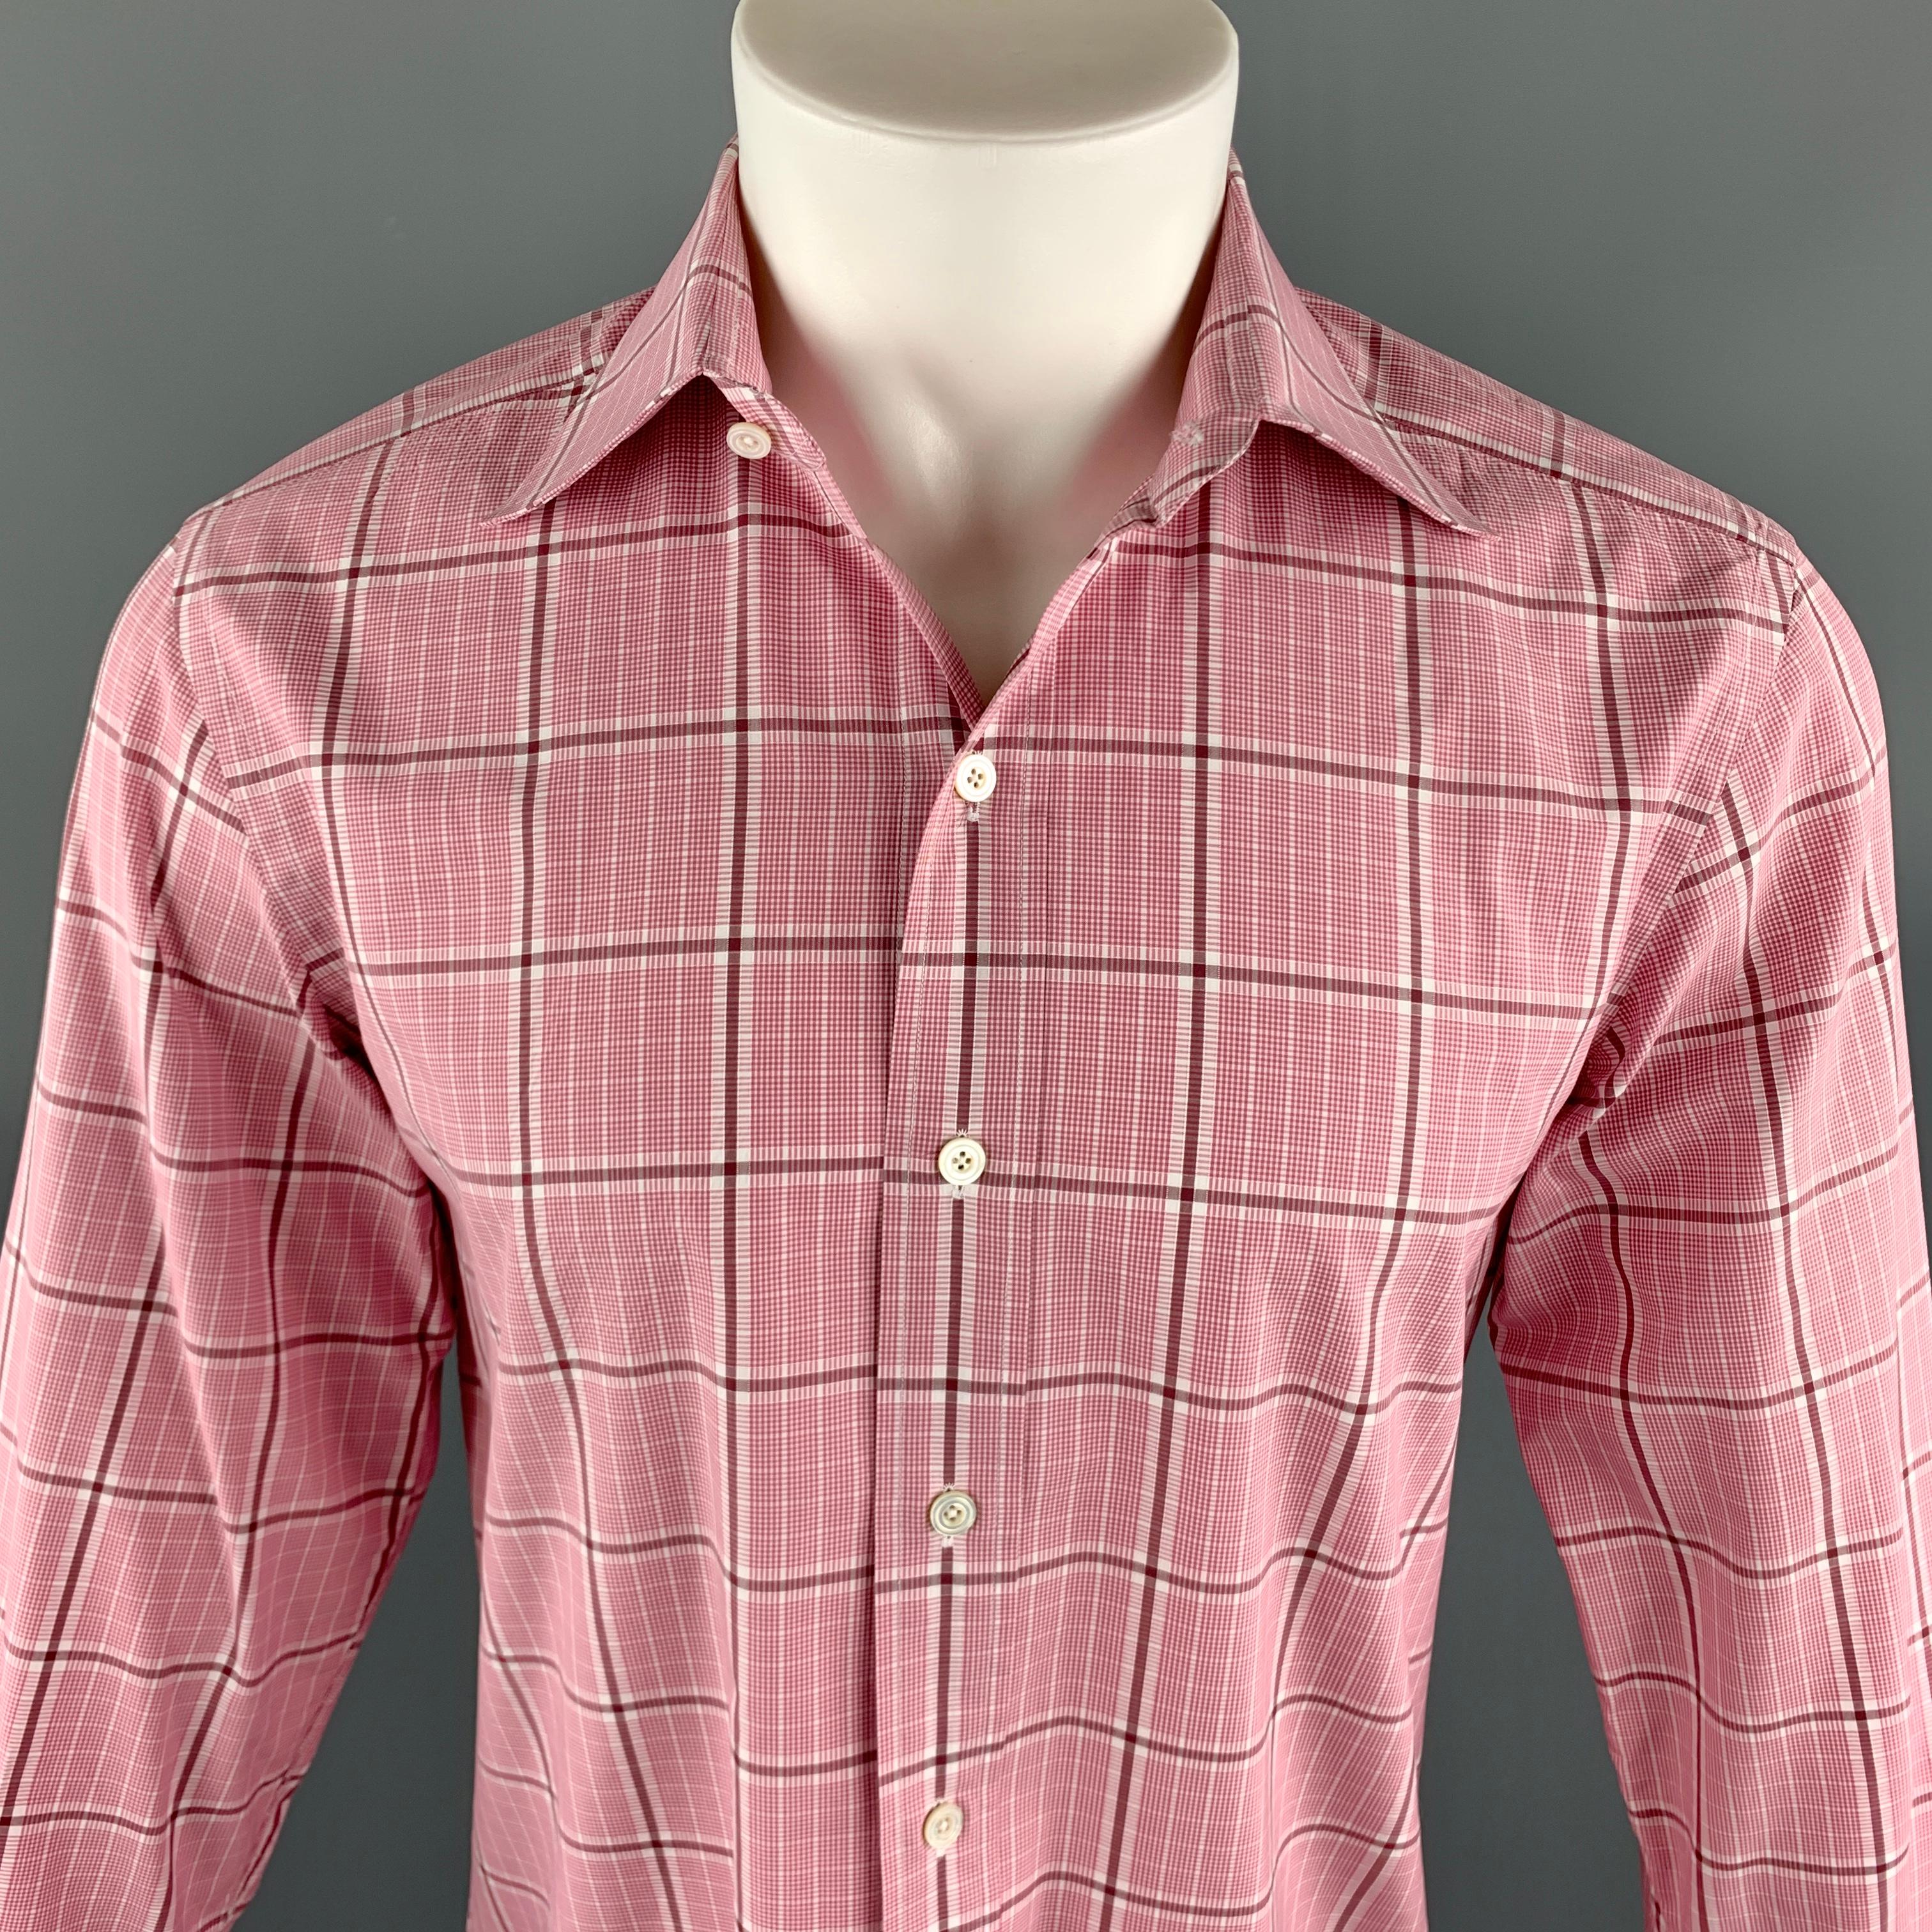 TOM FORD Long Sleeve Shirt comes in a pink plaid cotton material, with a spread collar and double buttoned cuffs, button up. Made in Italy.

Excellent Good Pre-Owned Condition.
Marked: 40  15 3/4

Measurements:

Shoulder: 17.5 in.
Chest: 42 in.